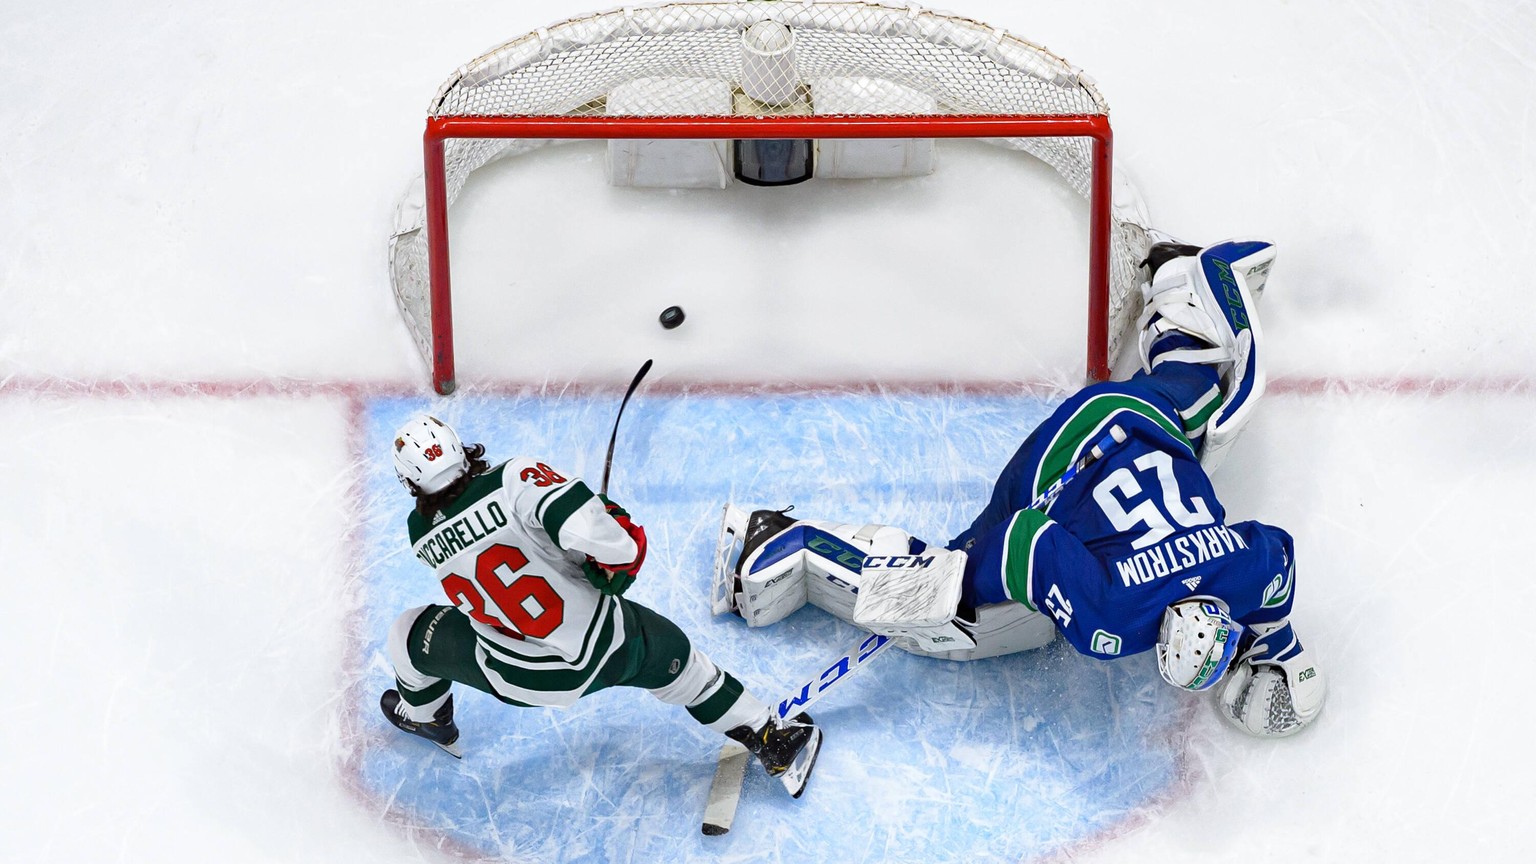 VANCOUVER, BC - FEBRUARY 19: Minnesota Wild Right Wing Mats Zuccarello 36 scores a shootout goal on Vancouver Canucks Goaltender Jacob Markstrom 25 during their NHL, Eishockey Herren, USA game at Roge ...